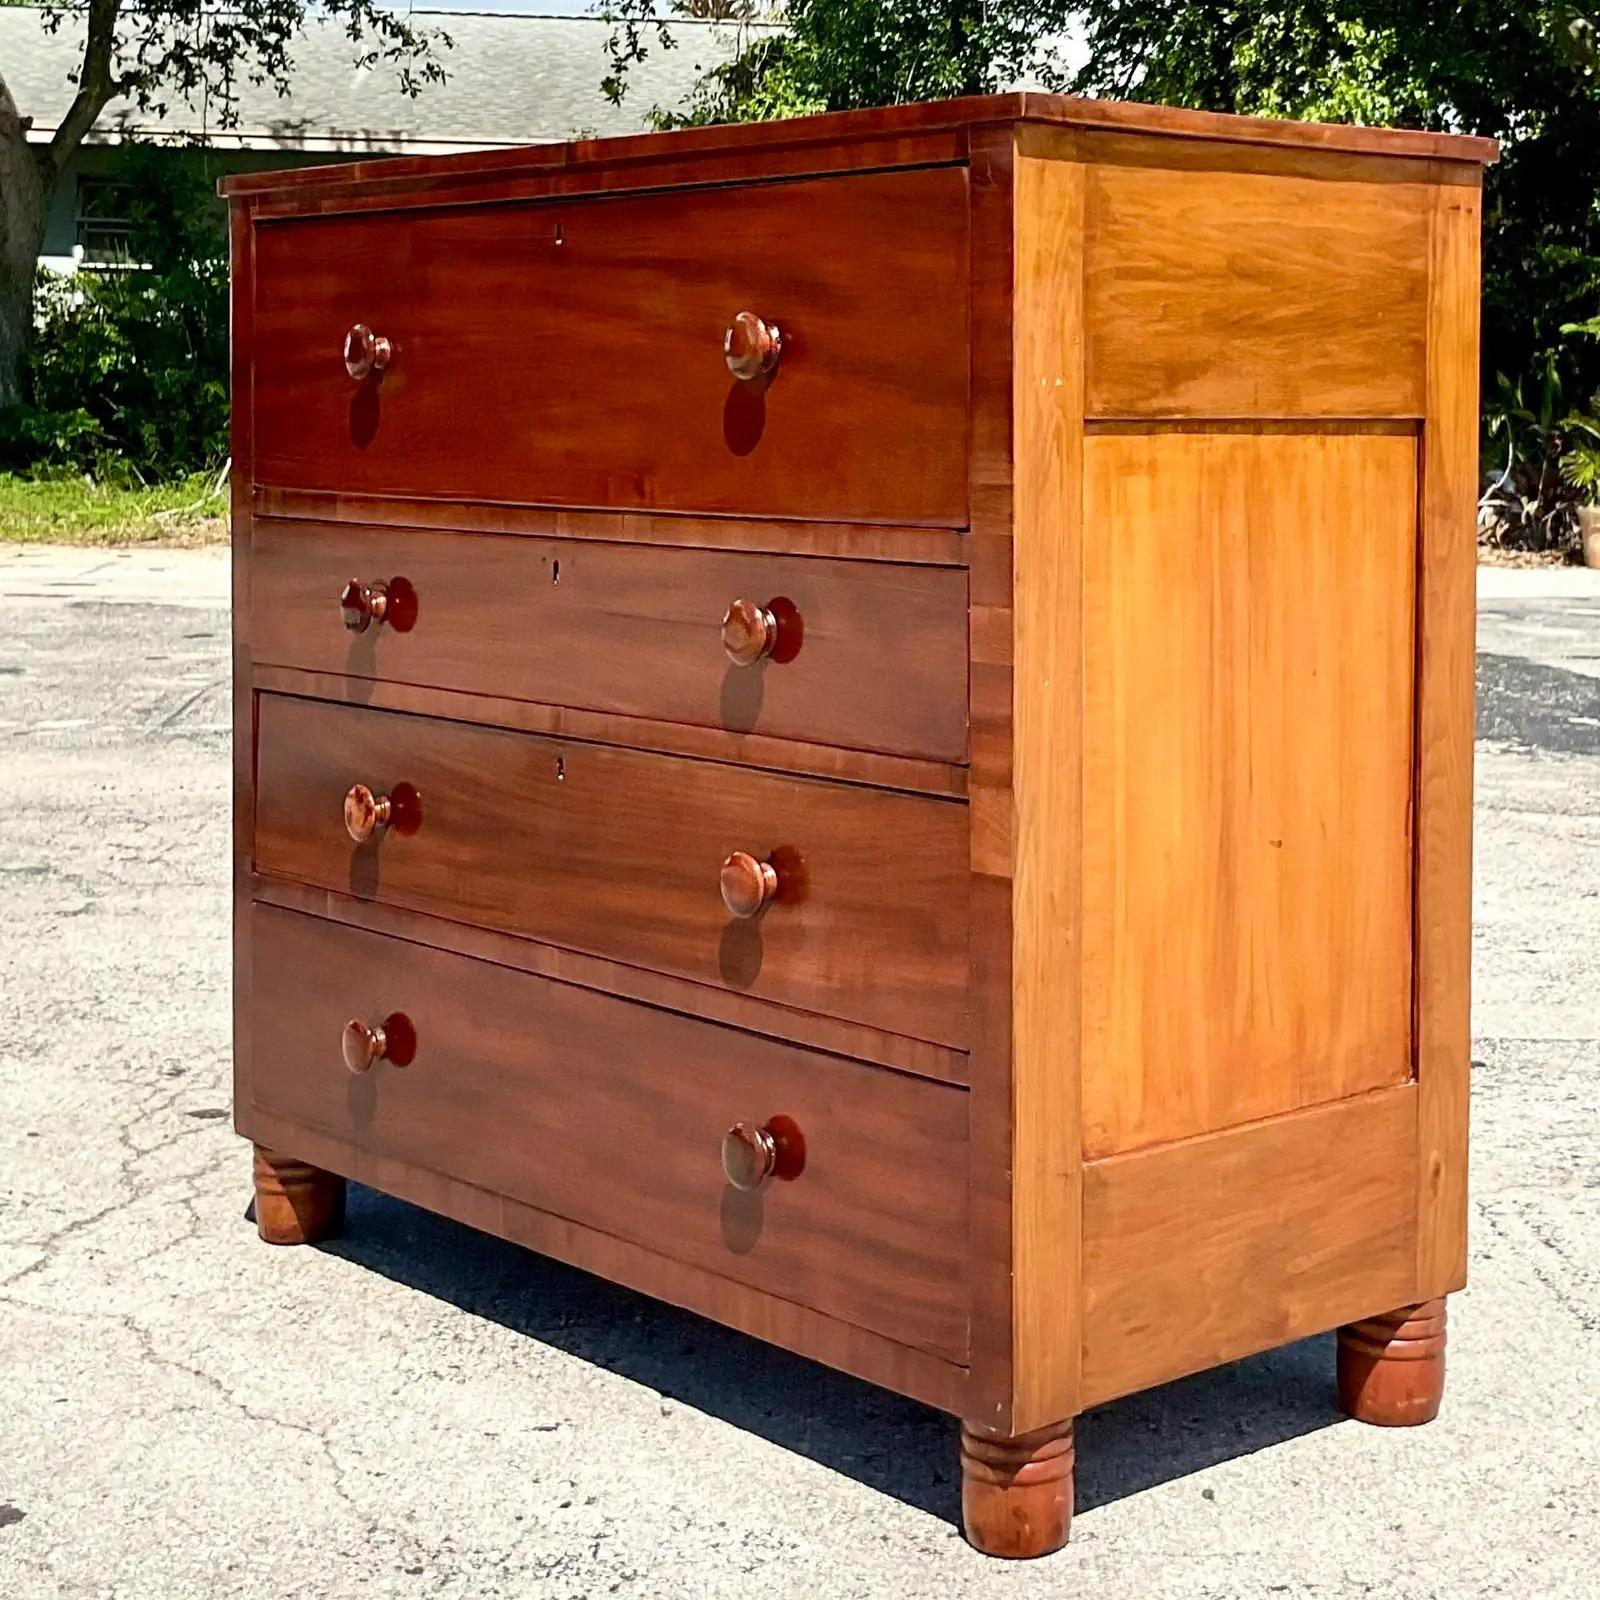 Fantastic vintage flame mahogany chest of drawers. Monumental and solid hard wood. A real showstopper. Perfect as a chest or a great piece in an entry with a mirror. Acquired from a Palm Beach estate.